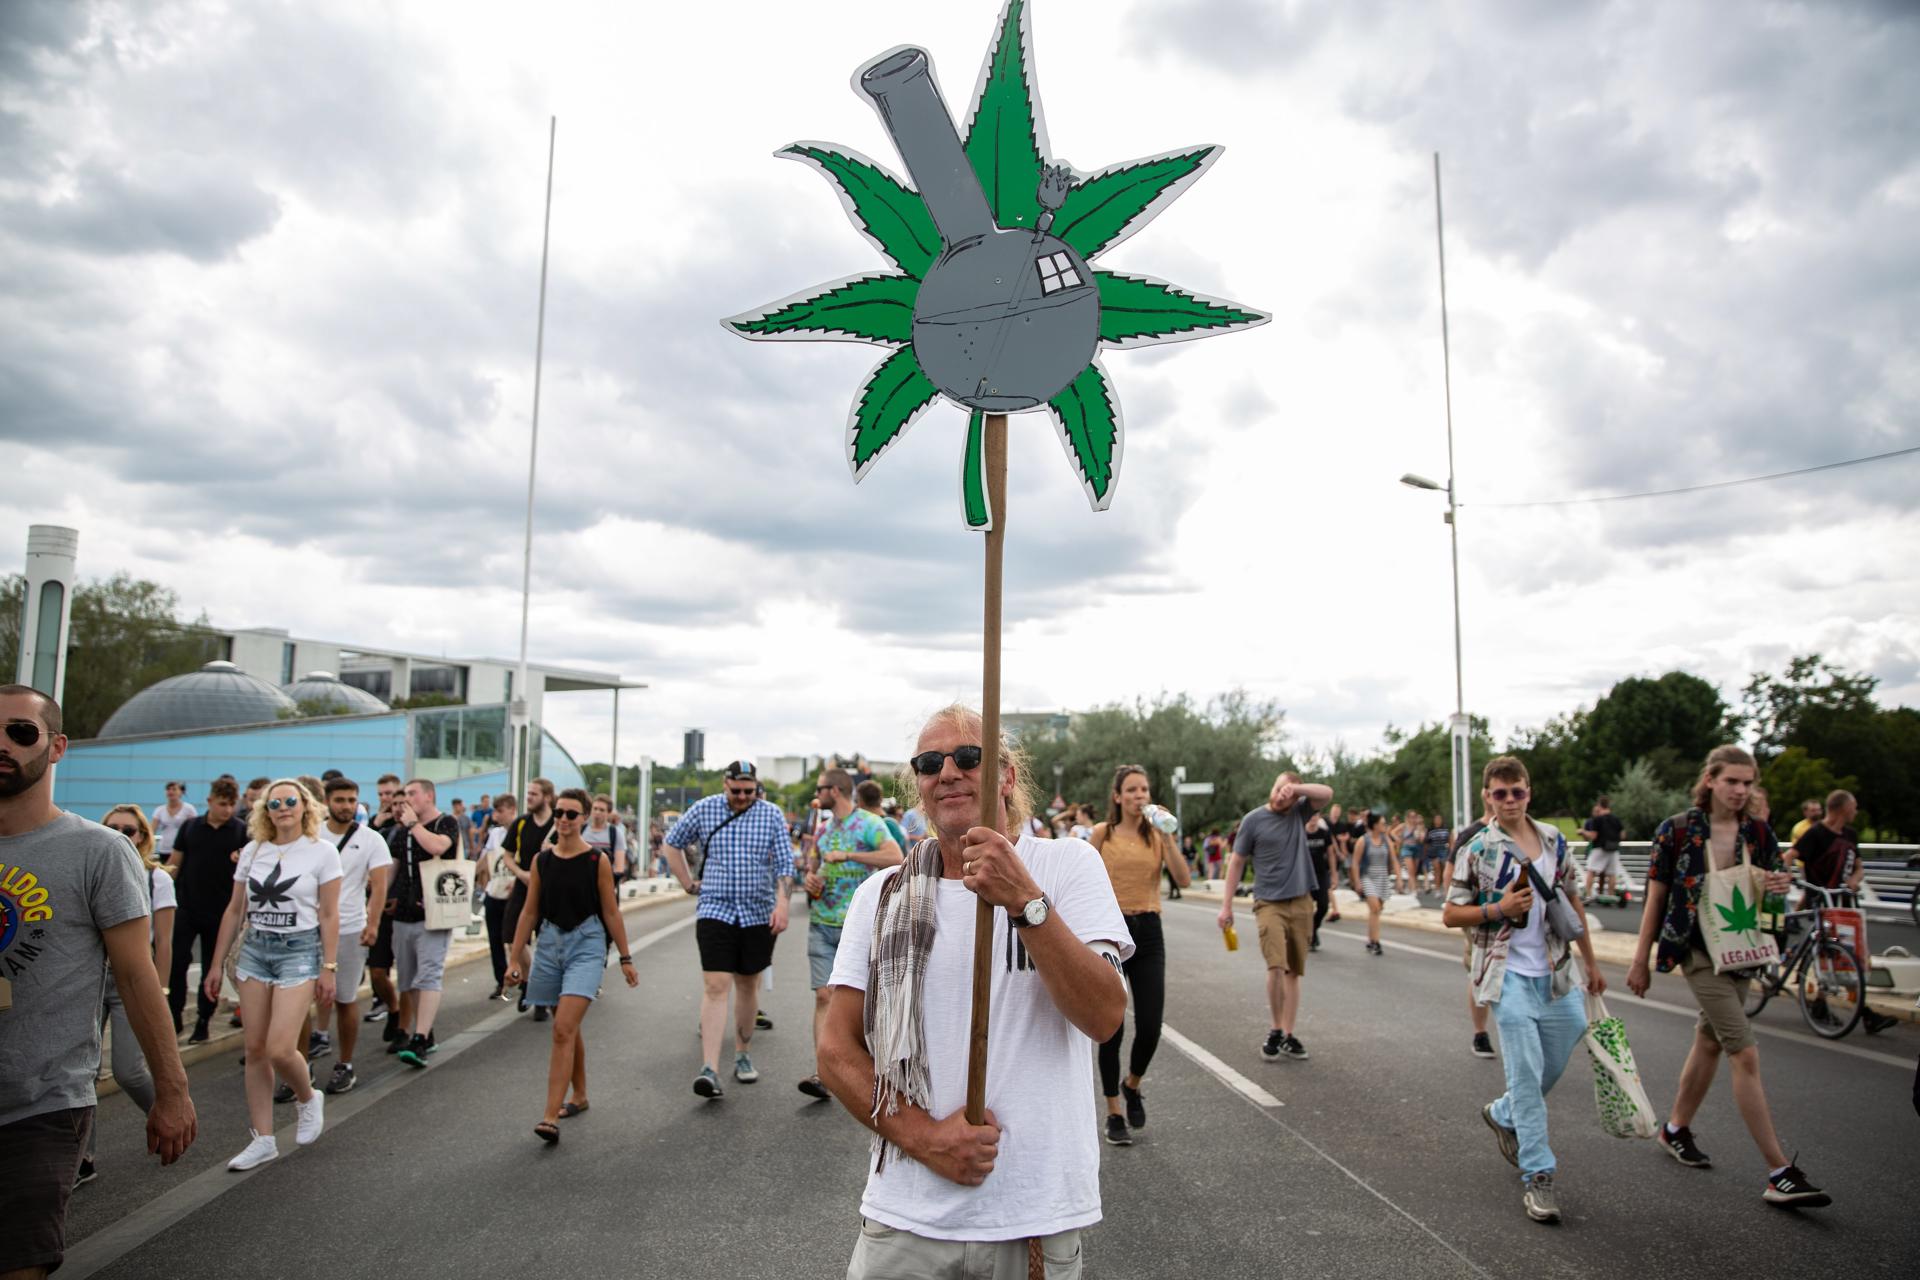 (FILE) A participant holds a banner with the cannabis symbol during the Hemp Parade (Hanfparade) demonstration as they pass by the Federal Chancellery in Berlin, Germany, 10 August 2019. EFE/EPA/OMER MESSINGER